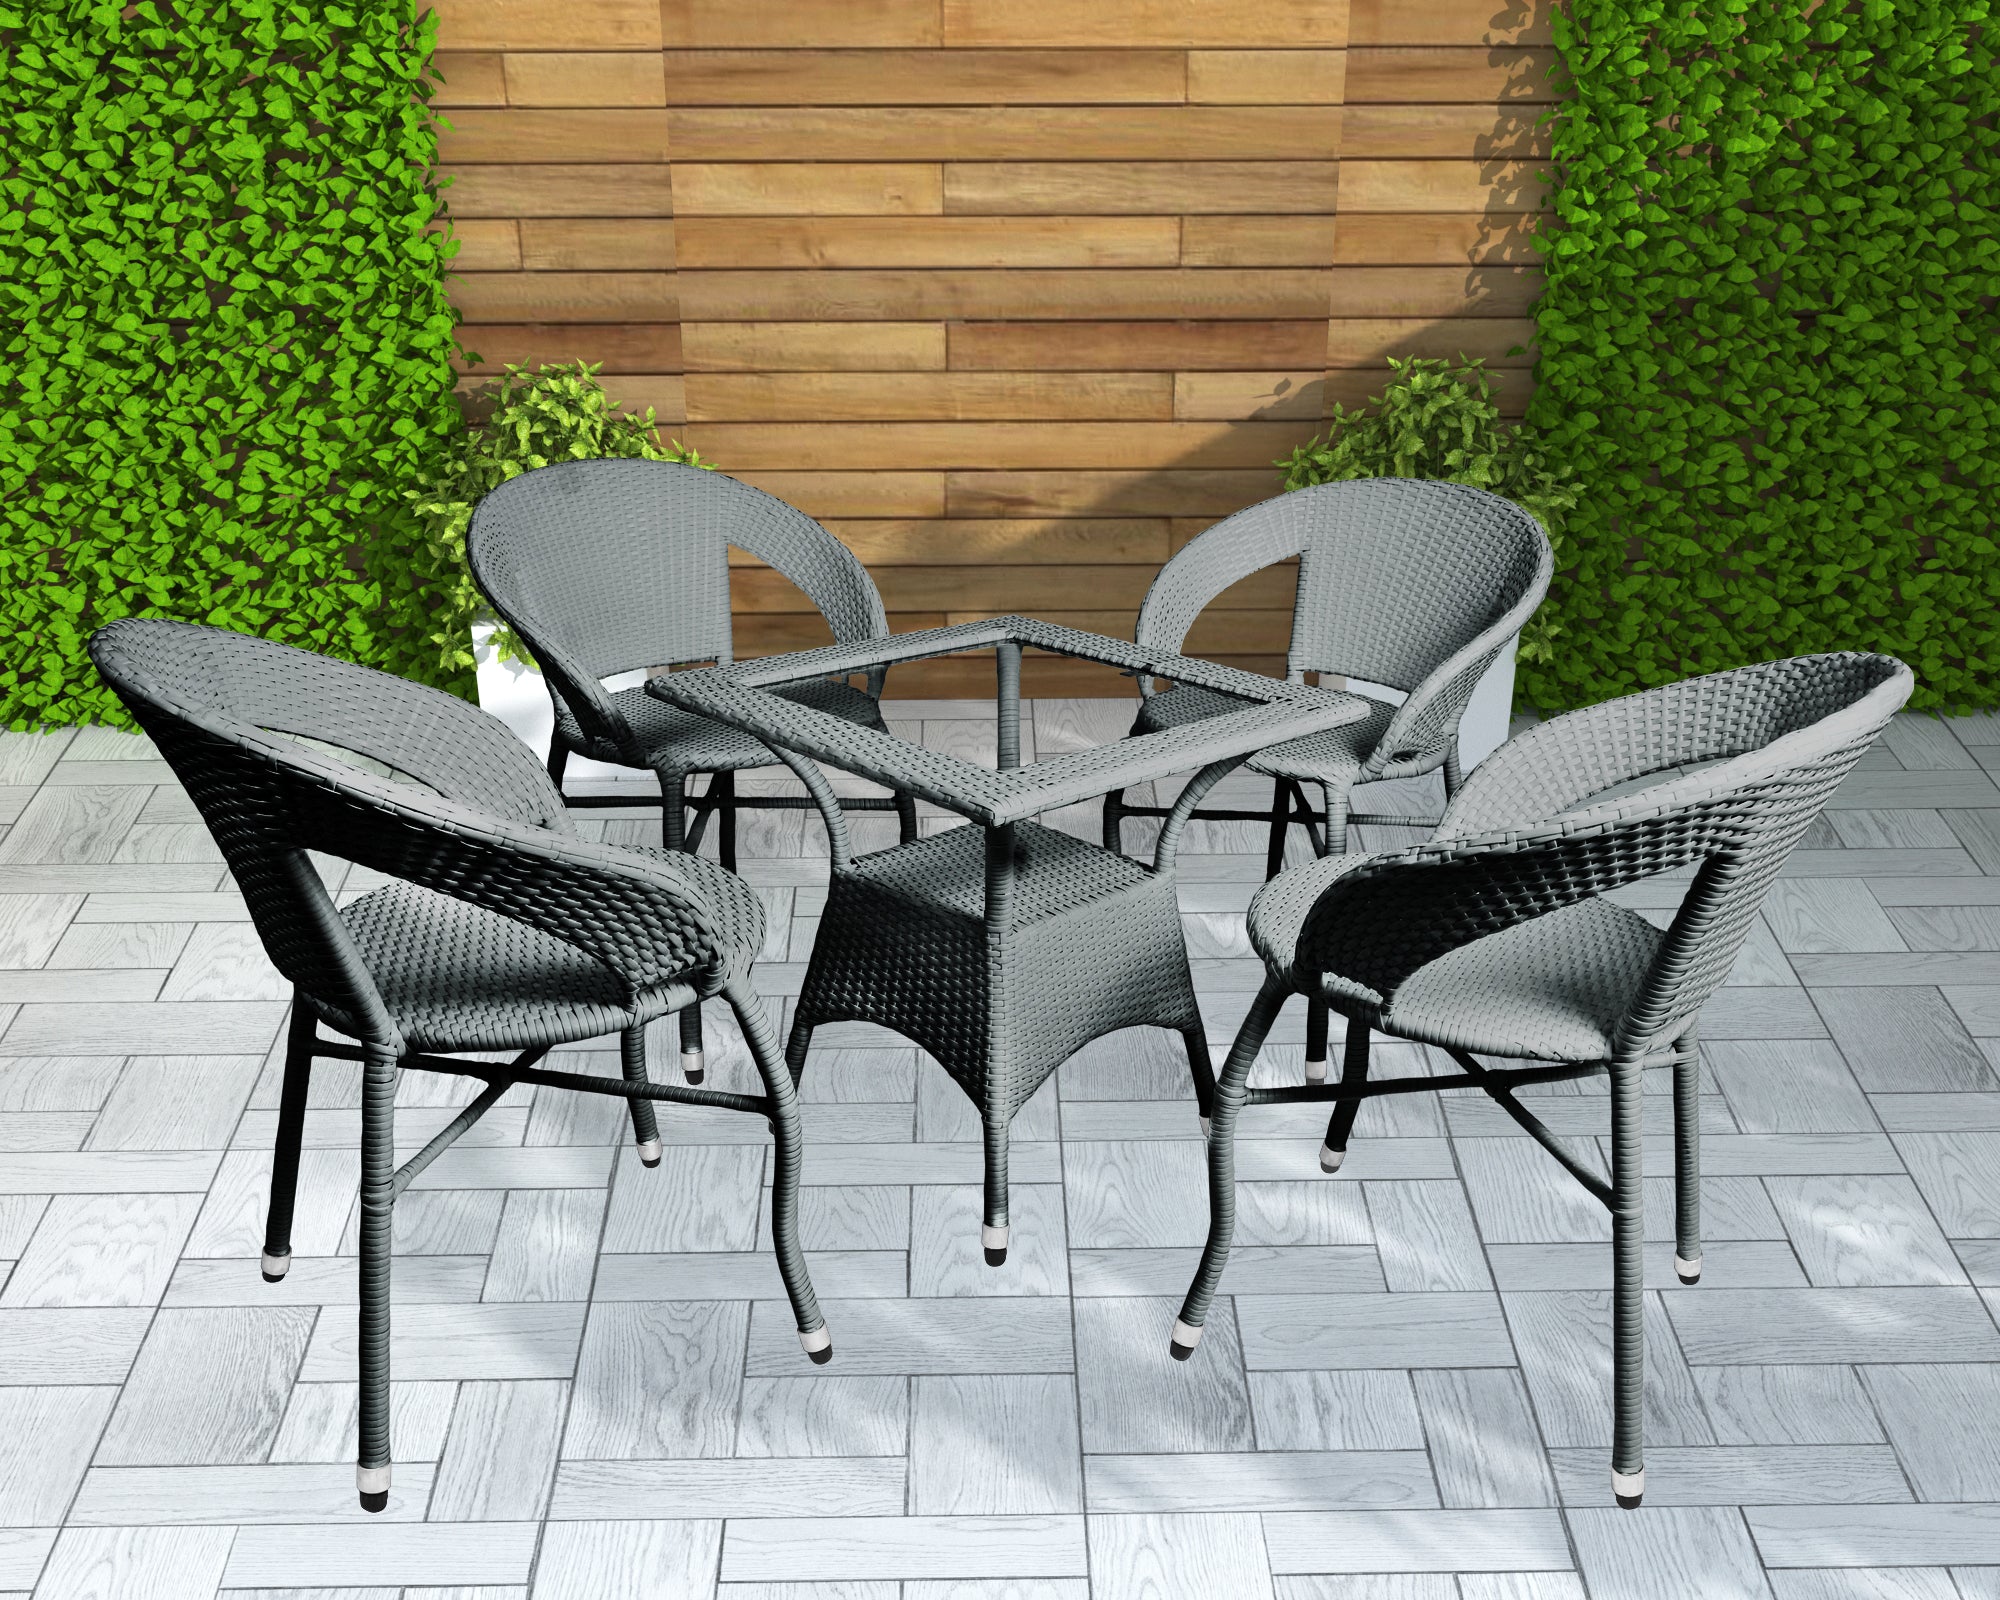 Molix Outdoor Patio Seating Set 4 Chairs and 1 Table Set (Silver)